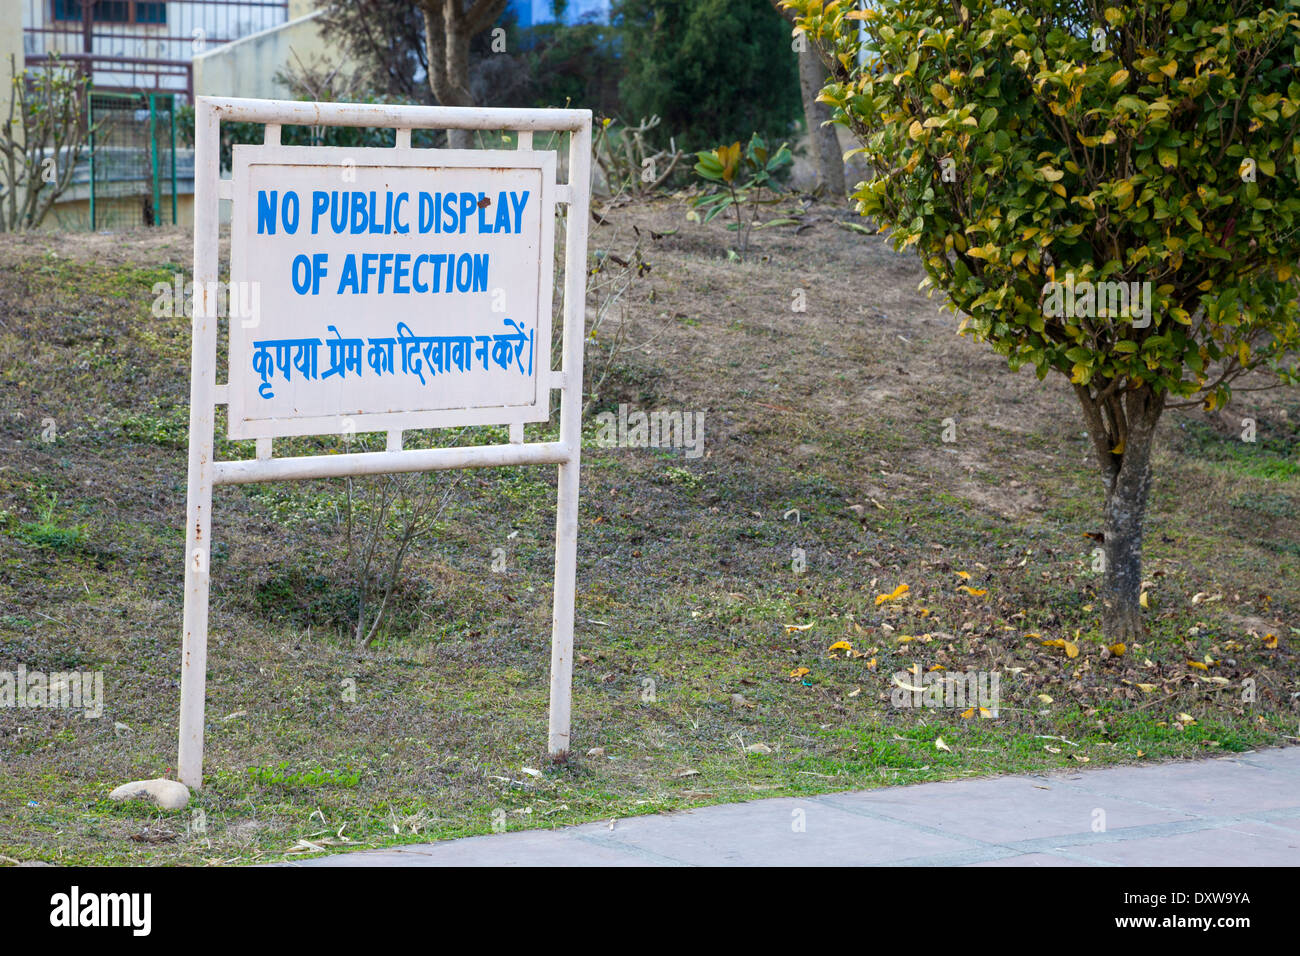 India, Dehradun. Sign on Grounds of the Buddhist Temple of Dehradun and Mindrolling Monastery. No Public Display of Affection. Stock Photo